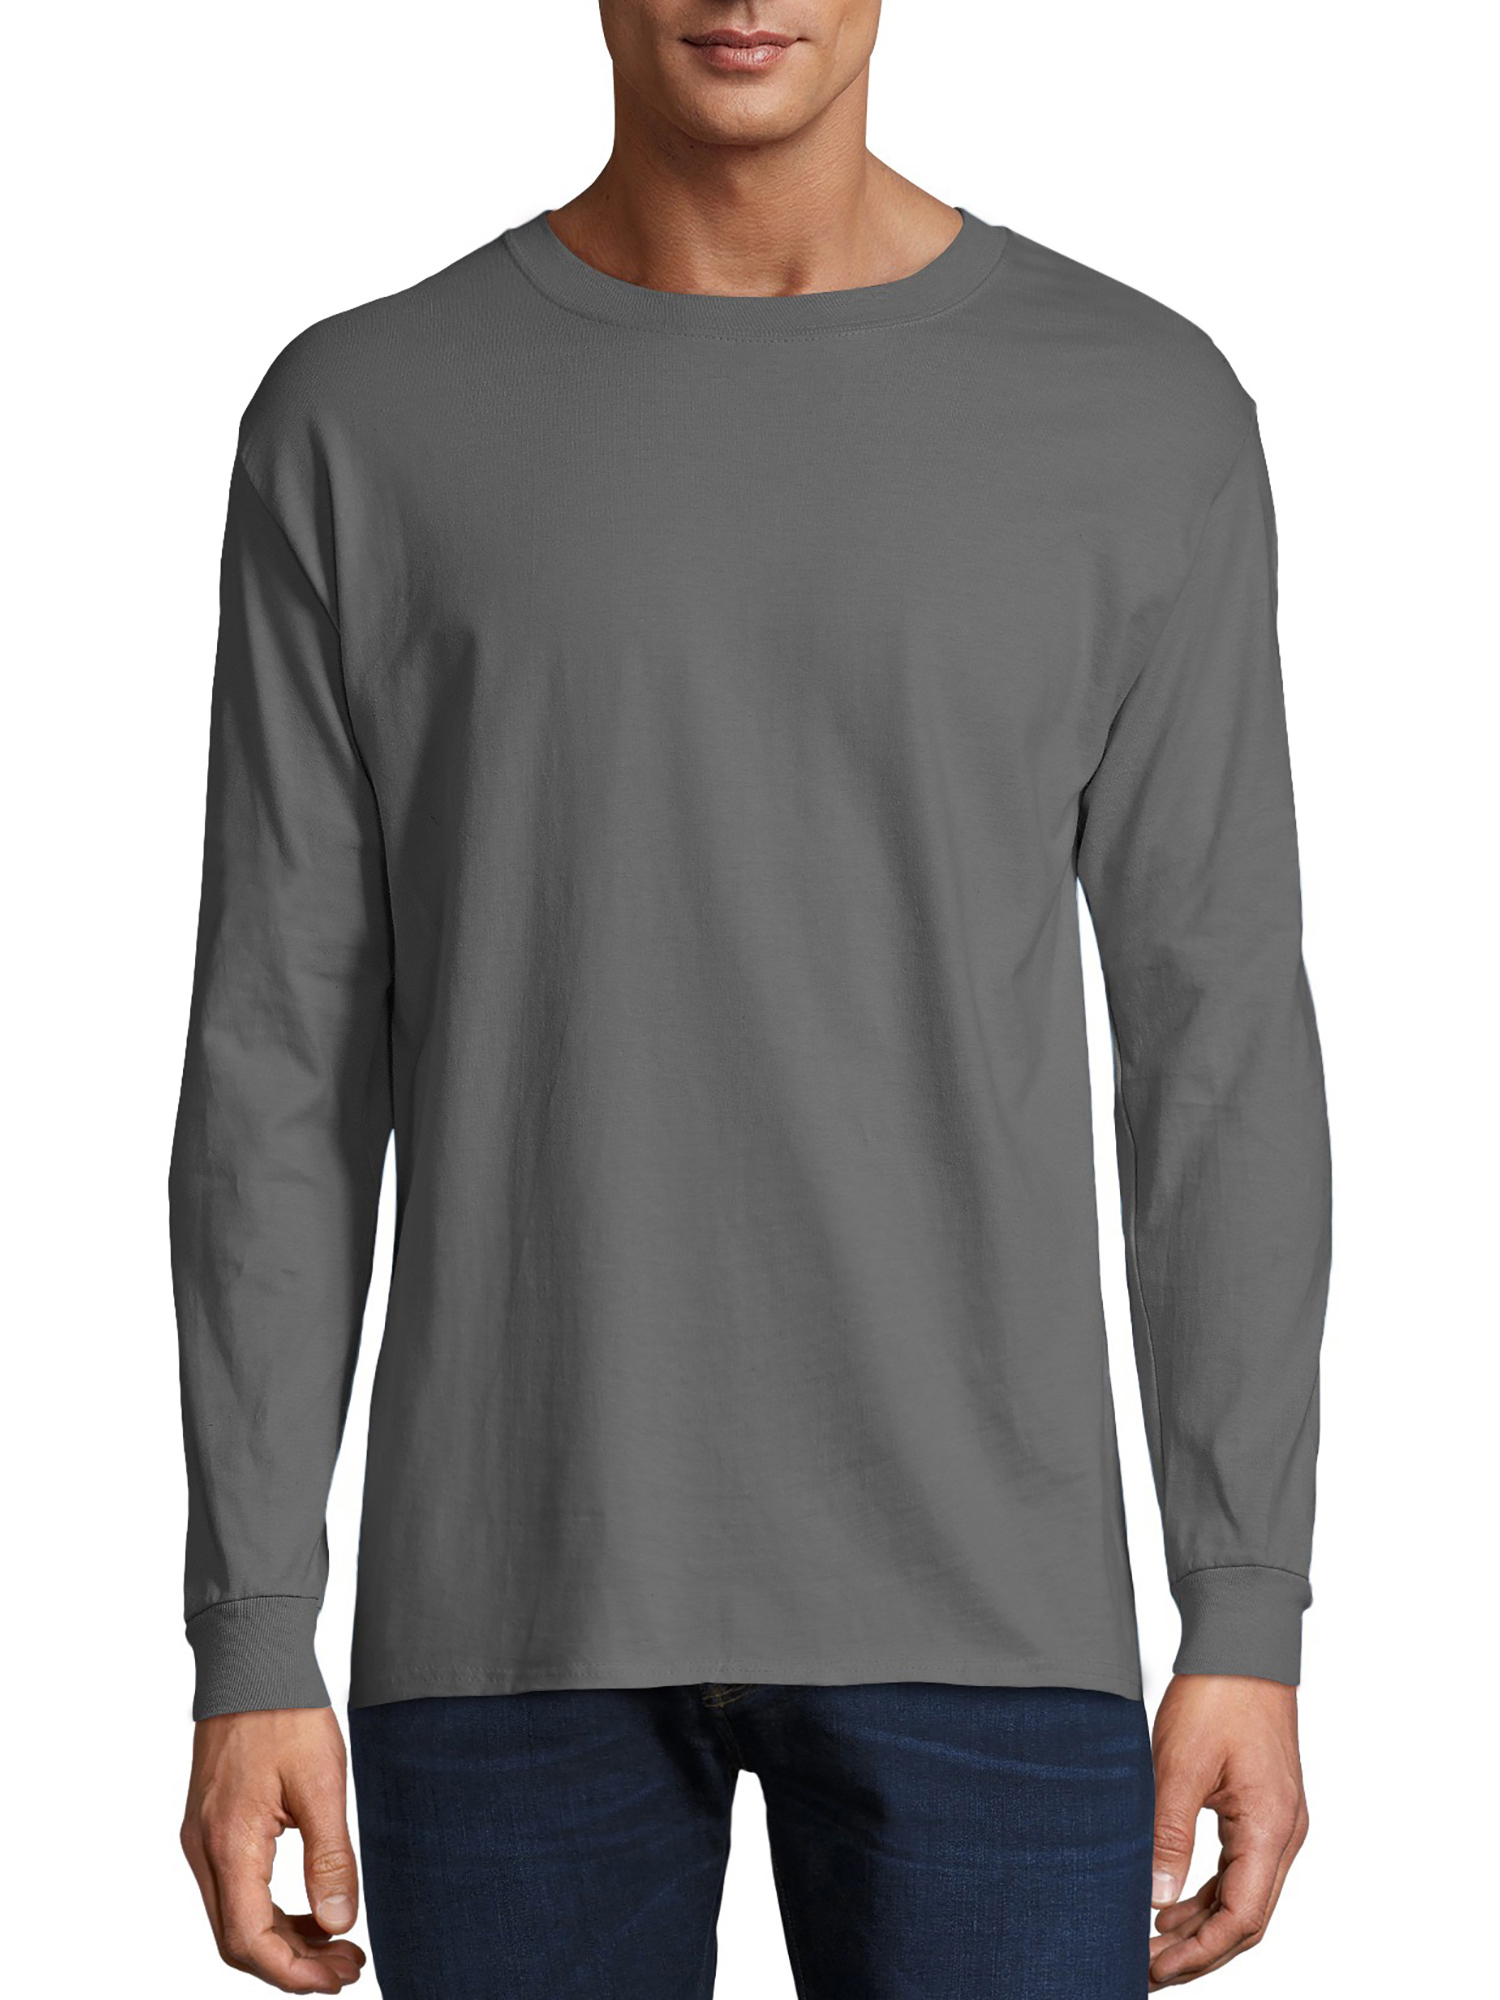 Hanes Men's and Big Men's Premium Beefy-T Long Sleeve T-Shirt, Up To 3XL - image 1 of 6